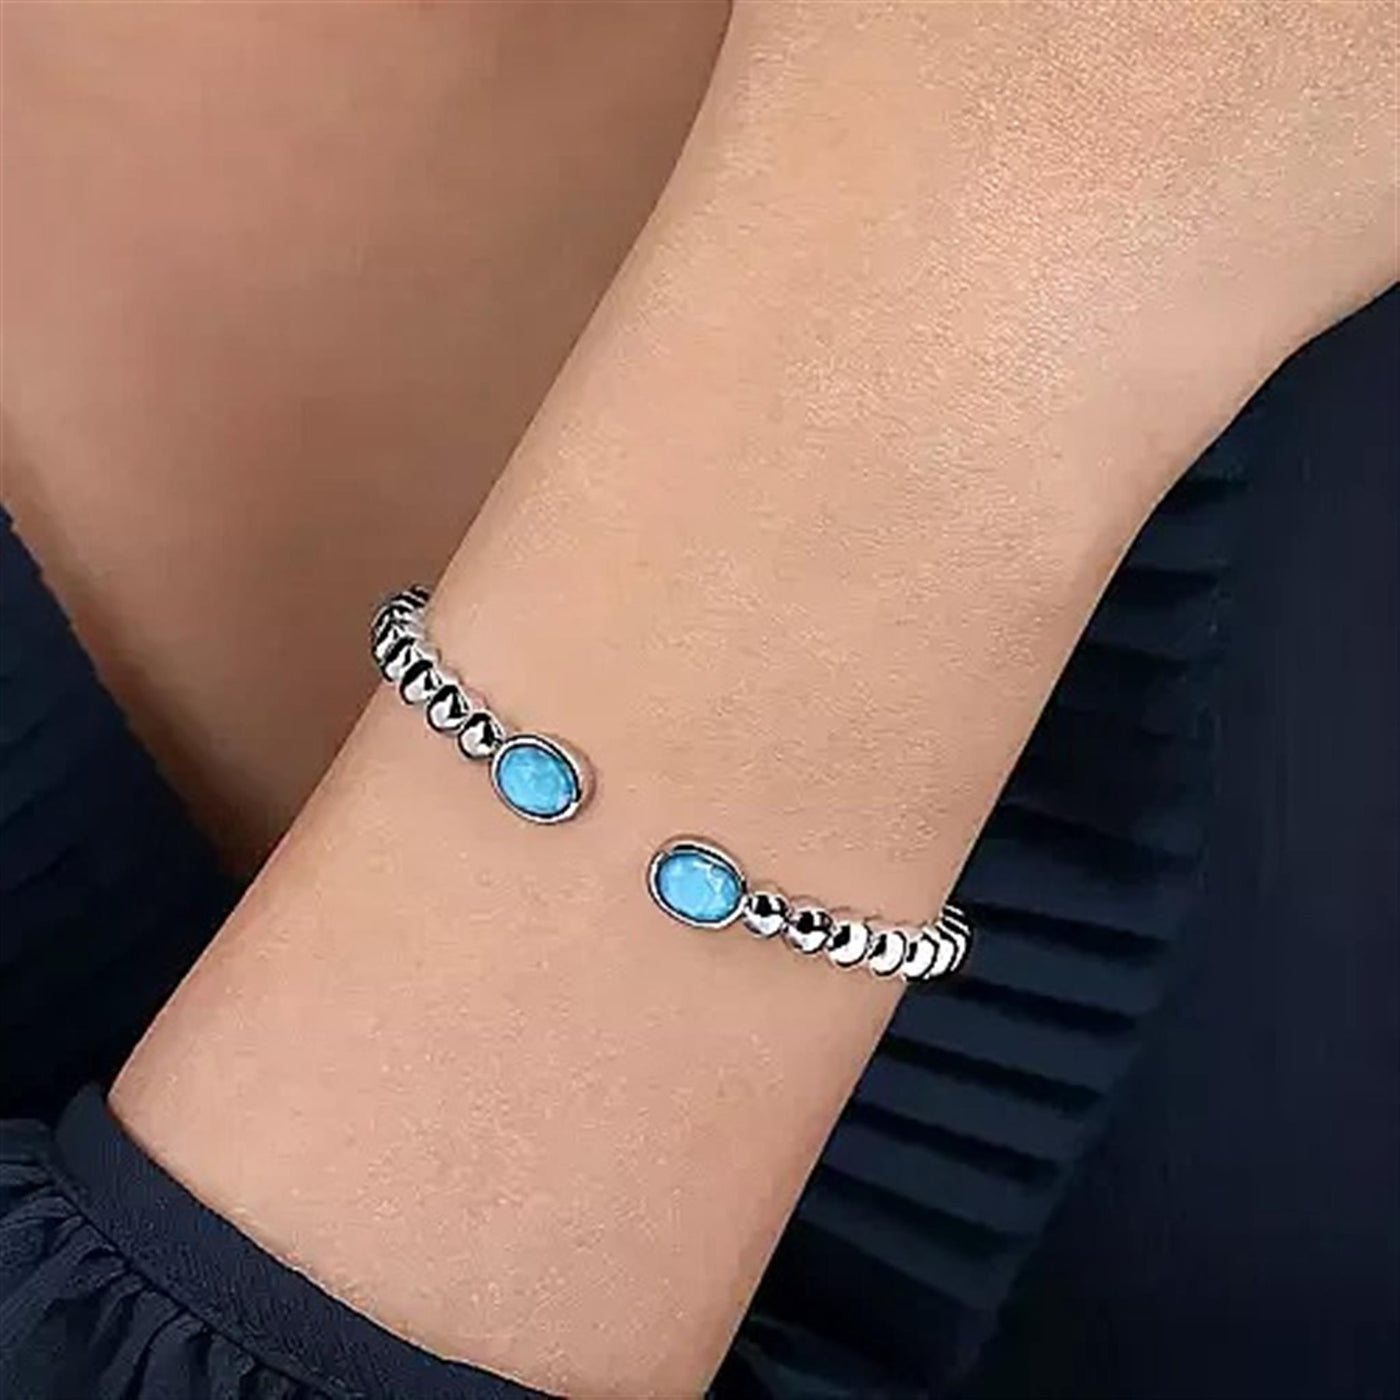 Gabriel Sterling Silver Medium Bujukan Cuff Style Bracelet Featuring Crystal Turquoise Doublet